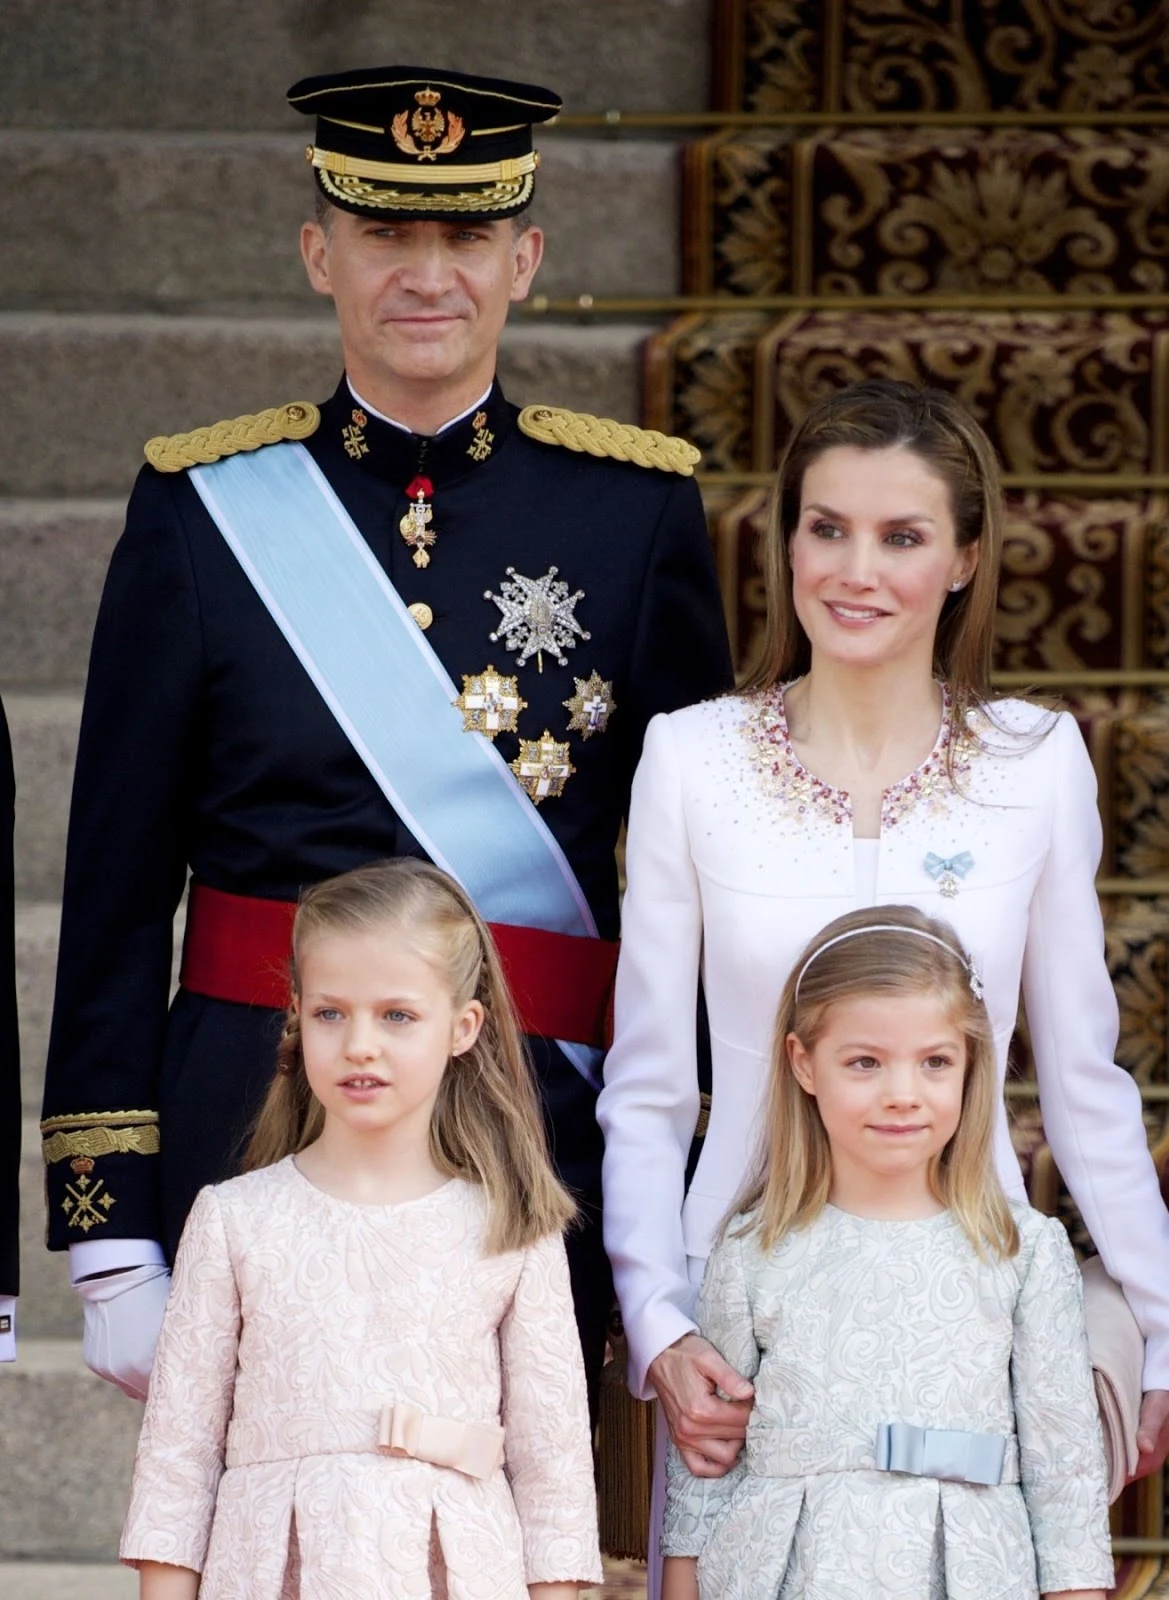 Spanish Queen Letizia, who can celebrate turning 42. 